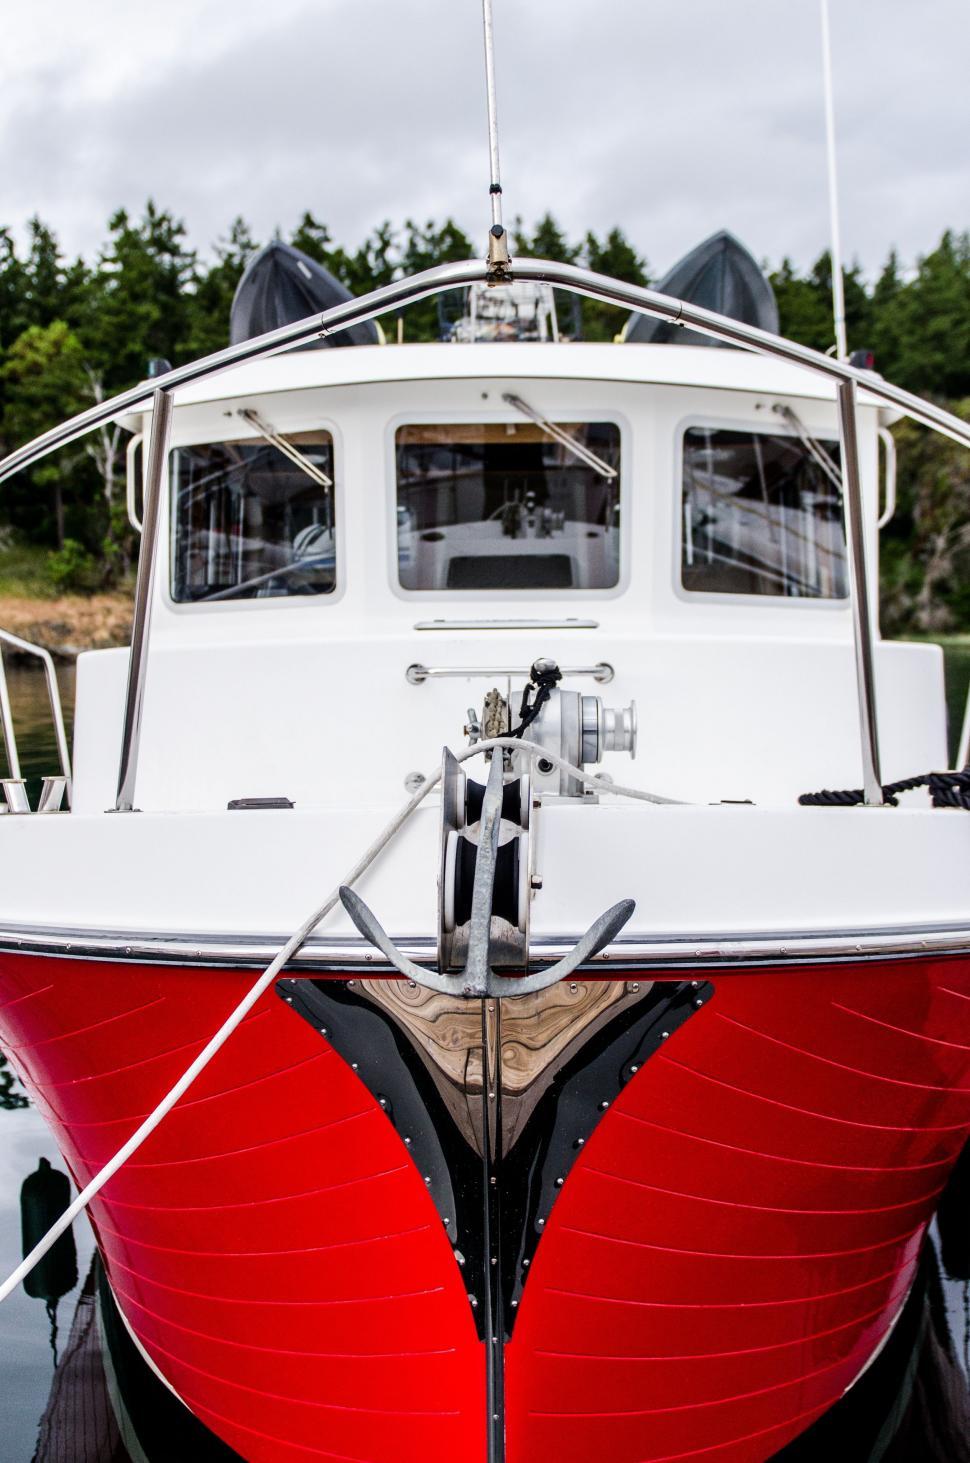 Free Image of Red and White Boat Docked at Dock 